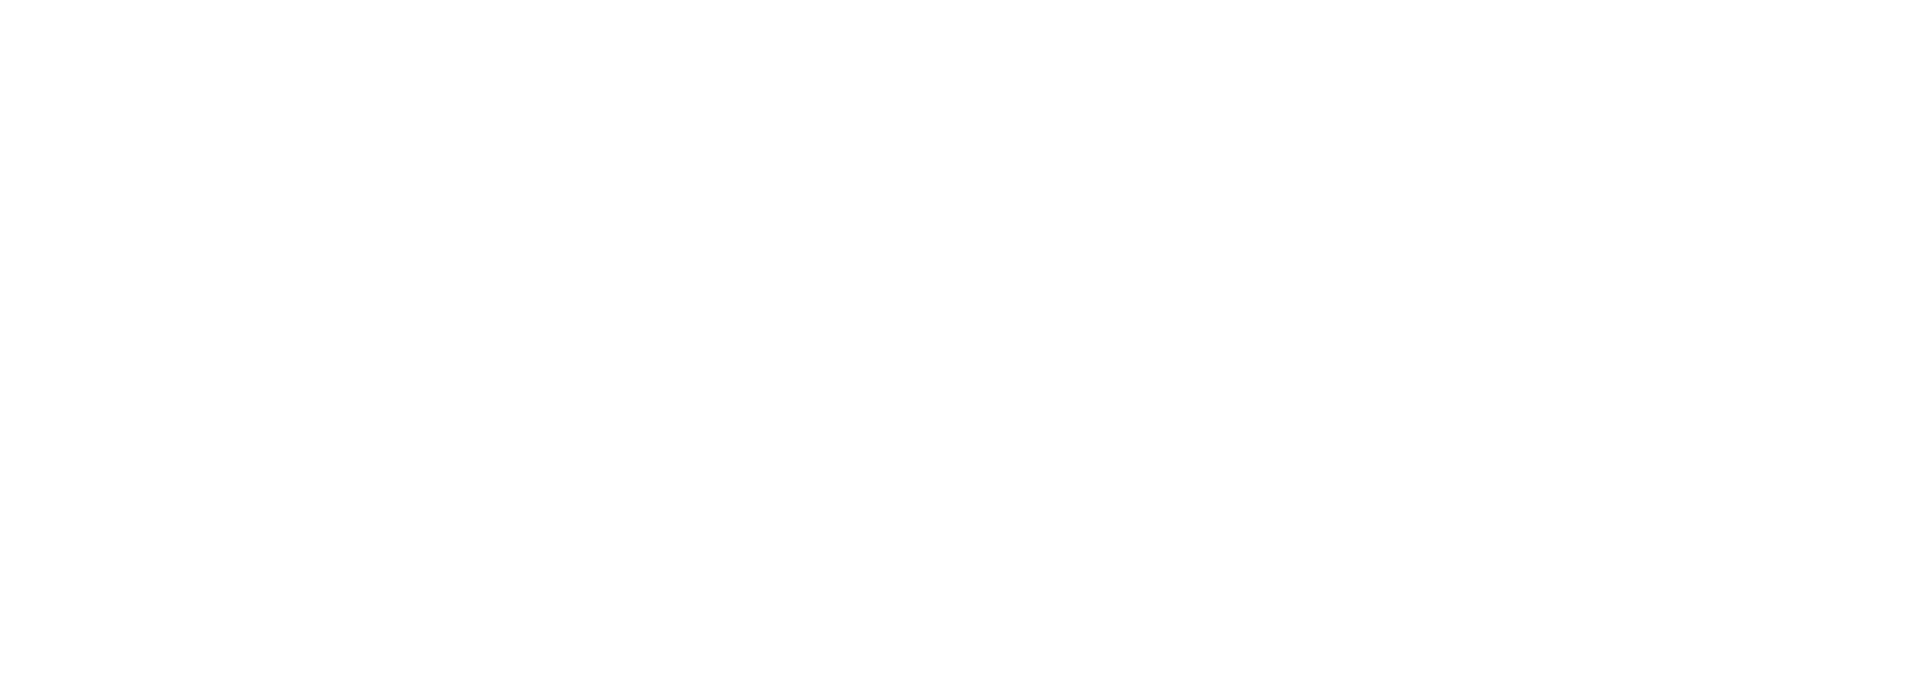 The Owl Supply Chain Unveiled